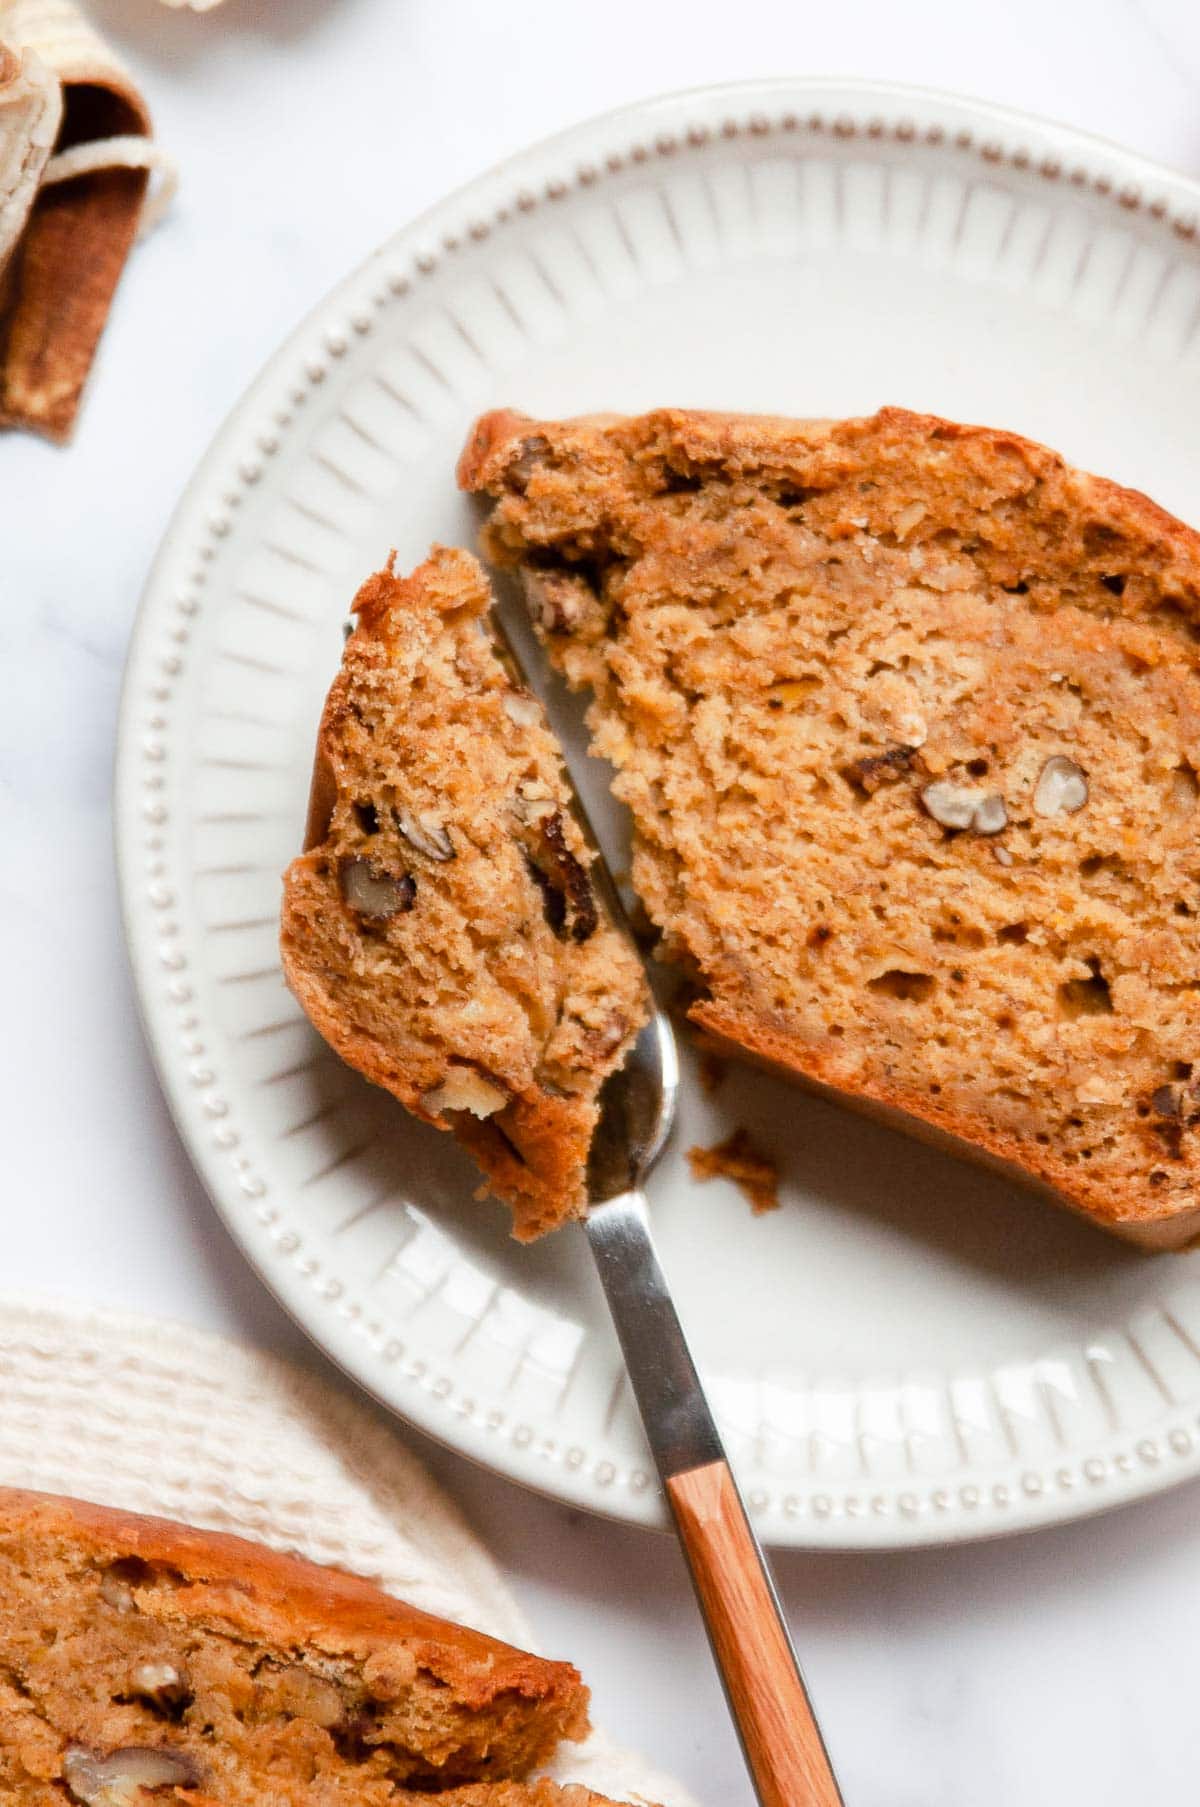 A slice of quick bread on plate with fork.